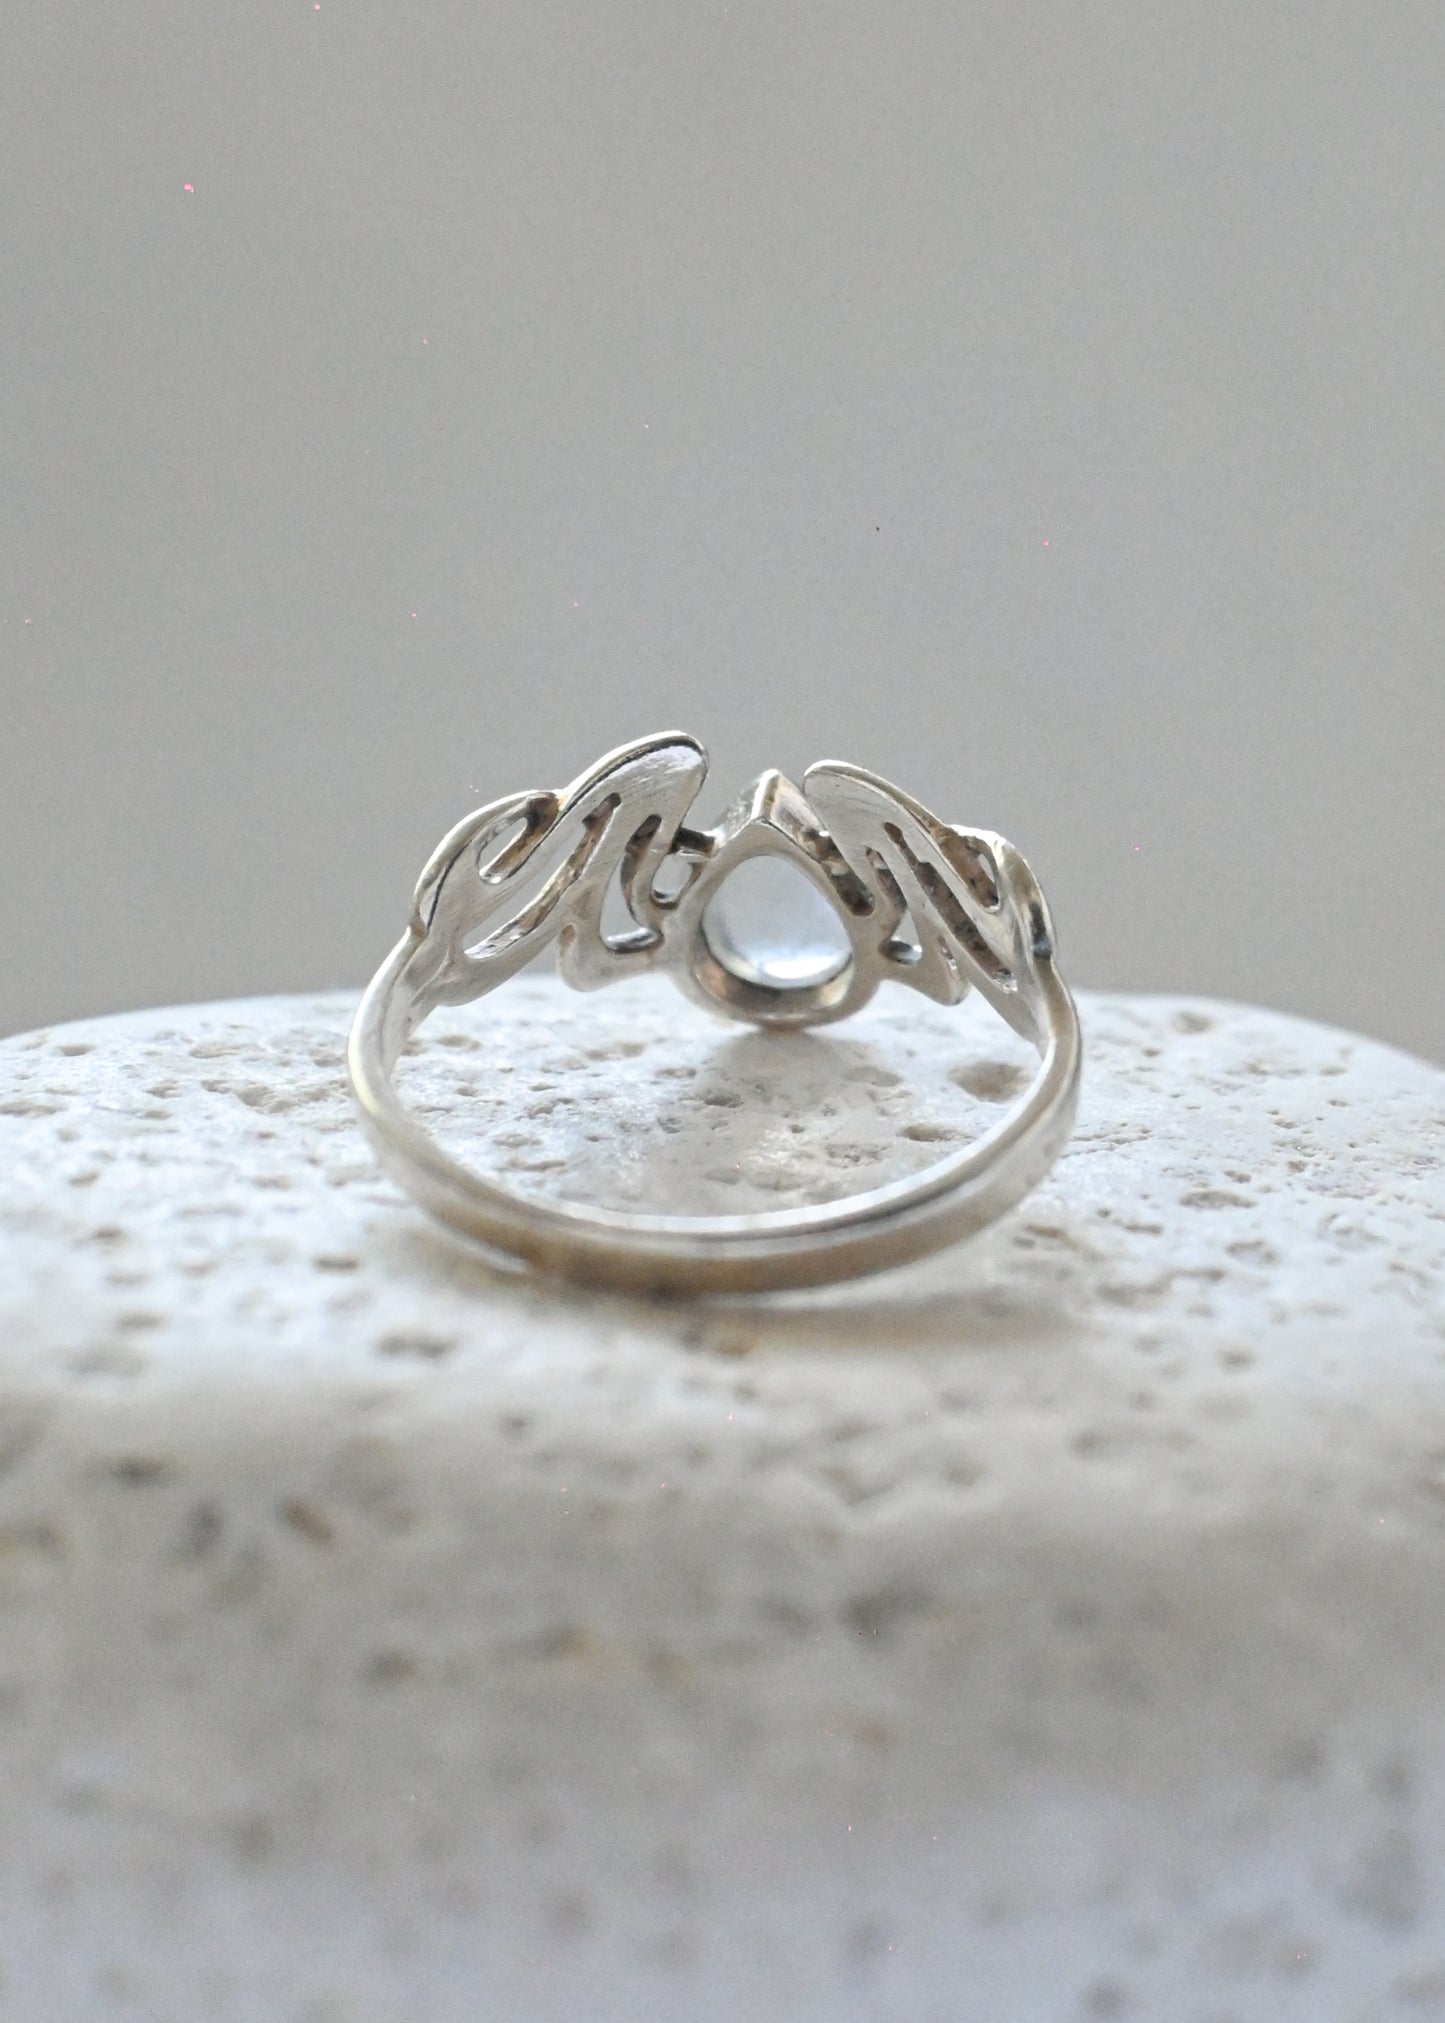 Moonstone Sterling Silver Ring - 13号